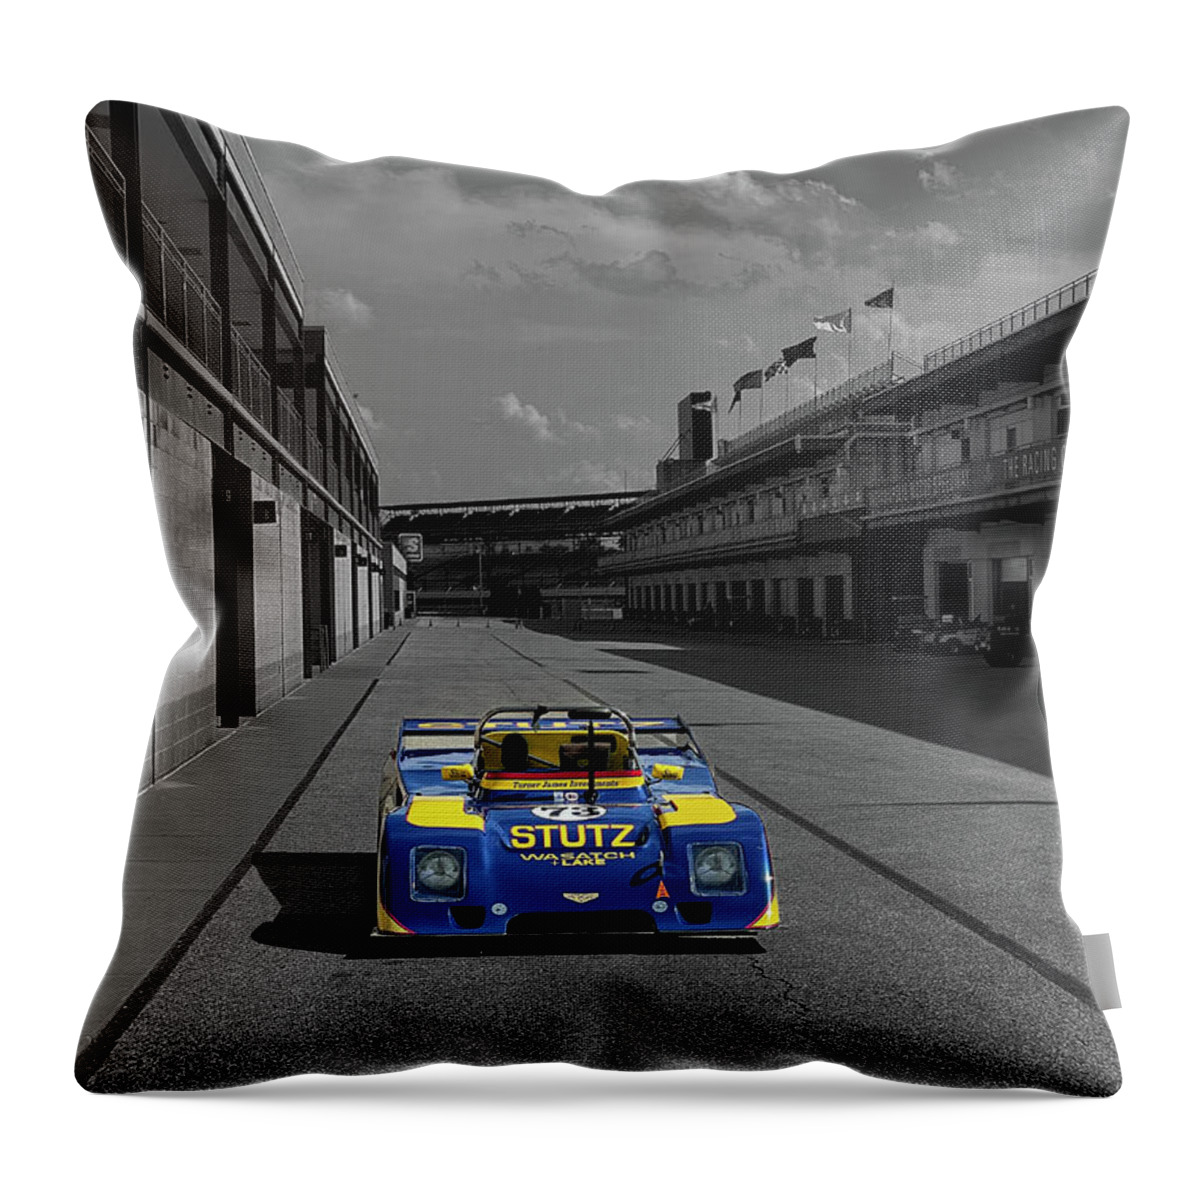  Throw Pillow featuring the photograph Stutz Racing by Josh Williams